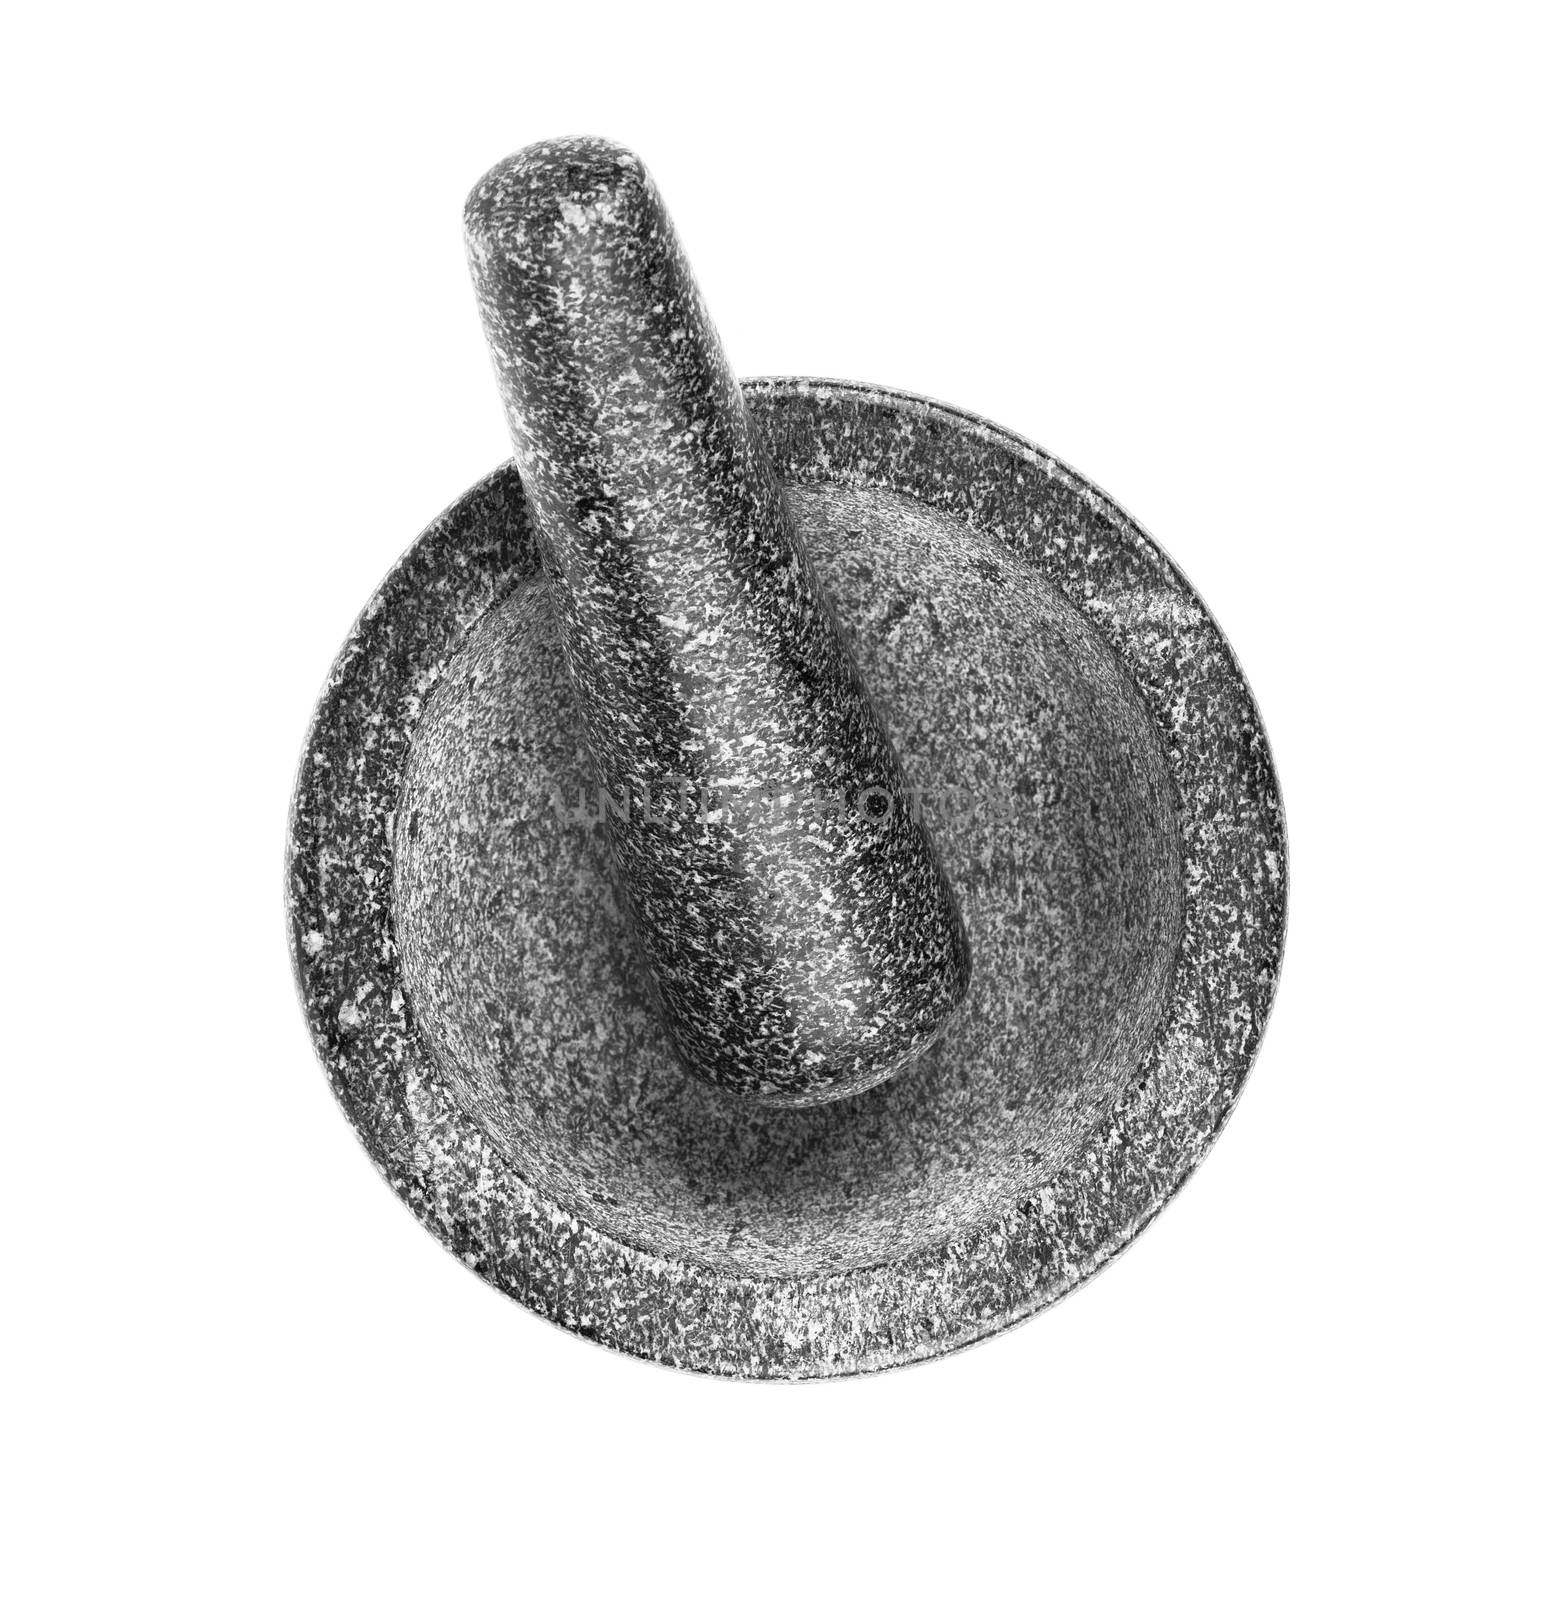 Mortar and Pestle Isolated on a White Background by motorolka